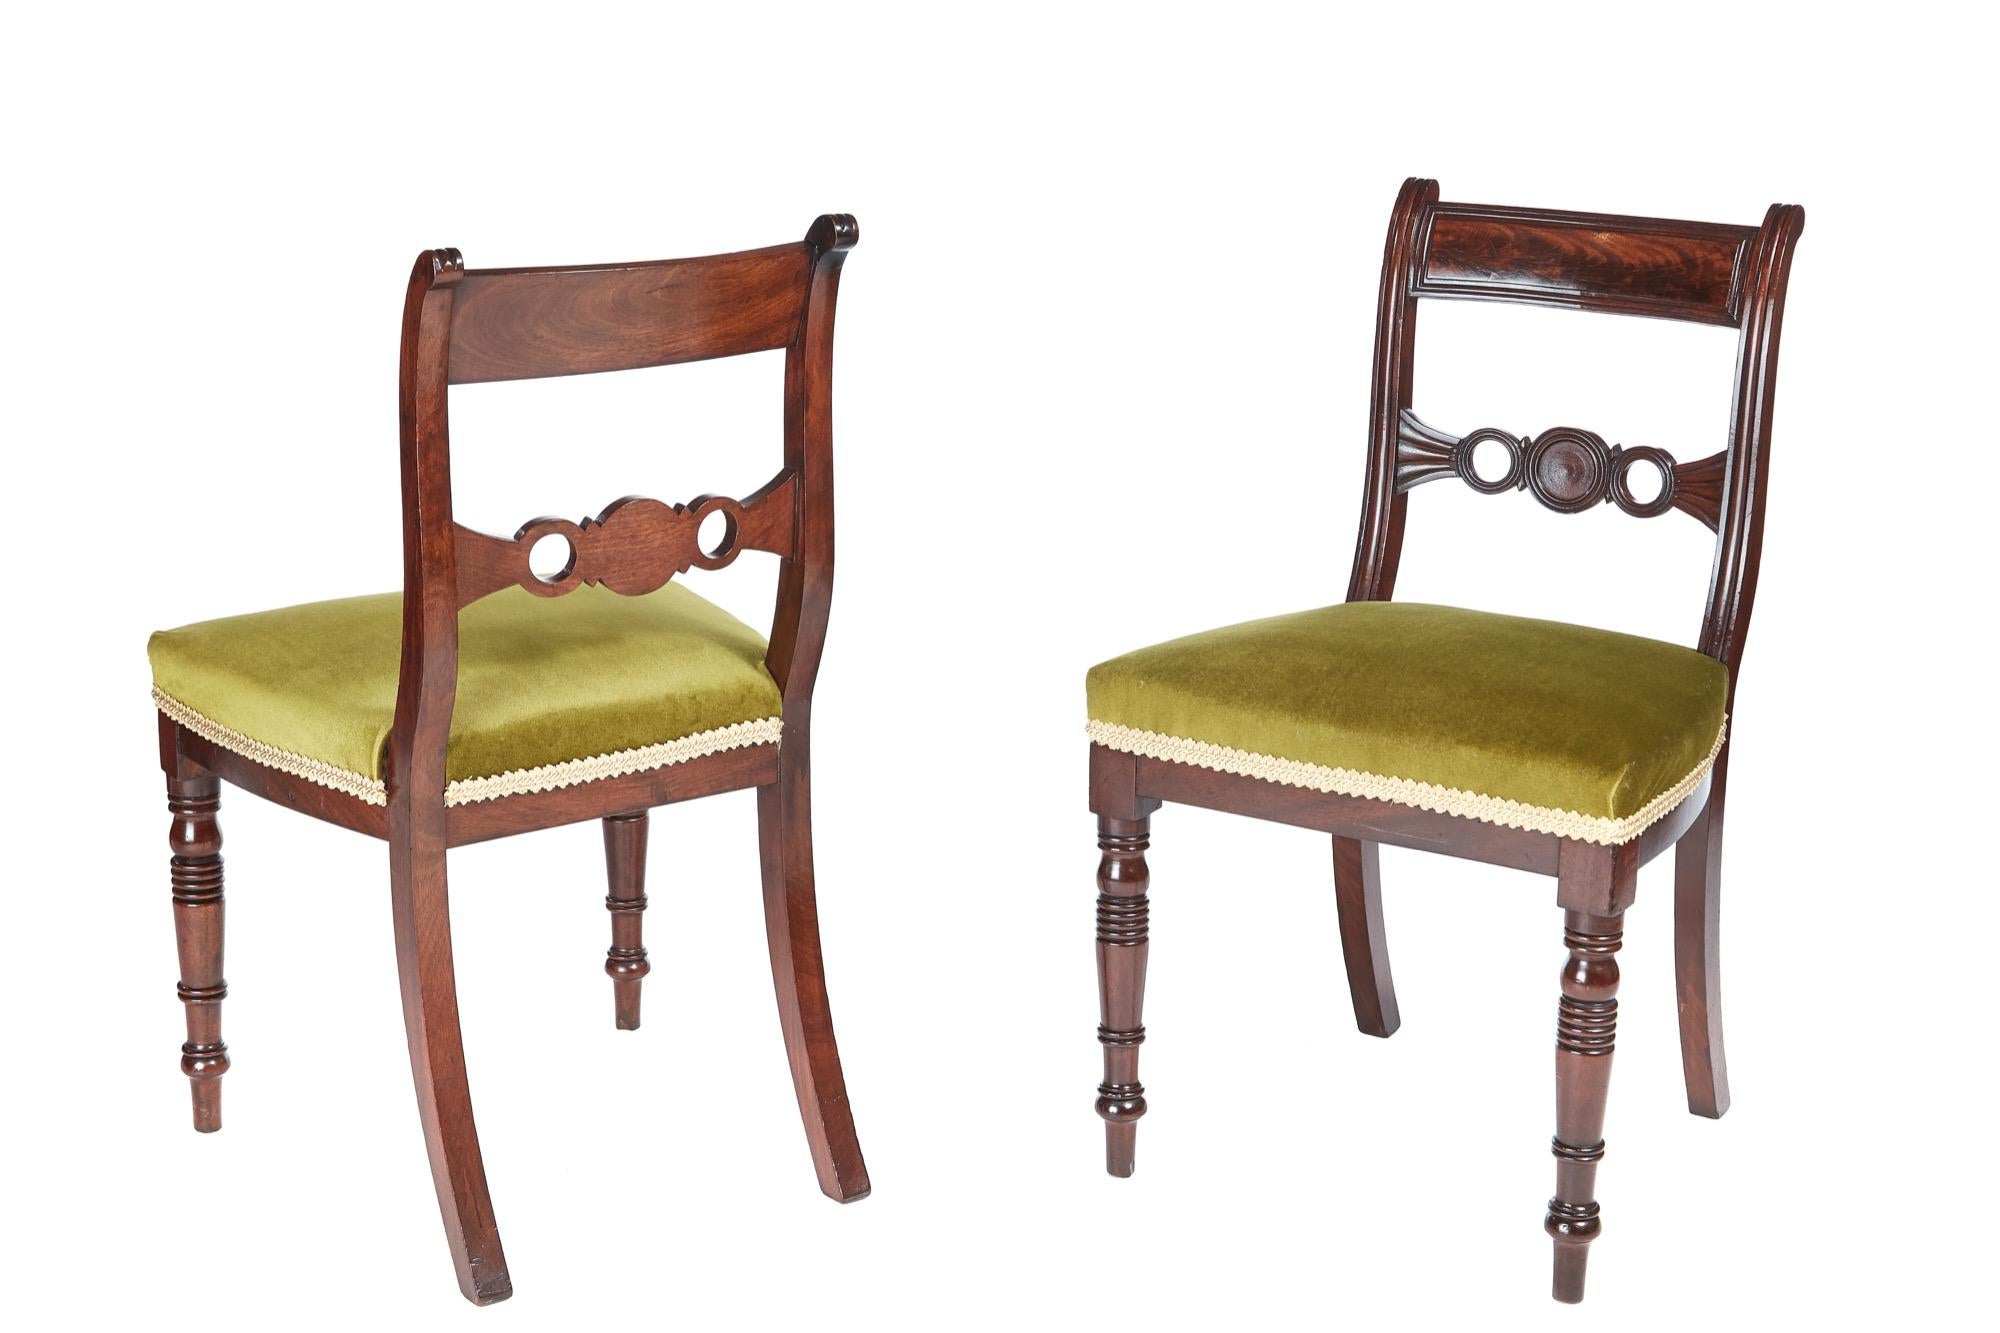 Fine set of six Regency antique mahogany dining chairs with a shaped reeded top rail, shaped reeded centre splat, elegant turned legs to the front outswept back legs. Newly reupholstered seats.

Excellent condition and color.

   